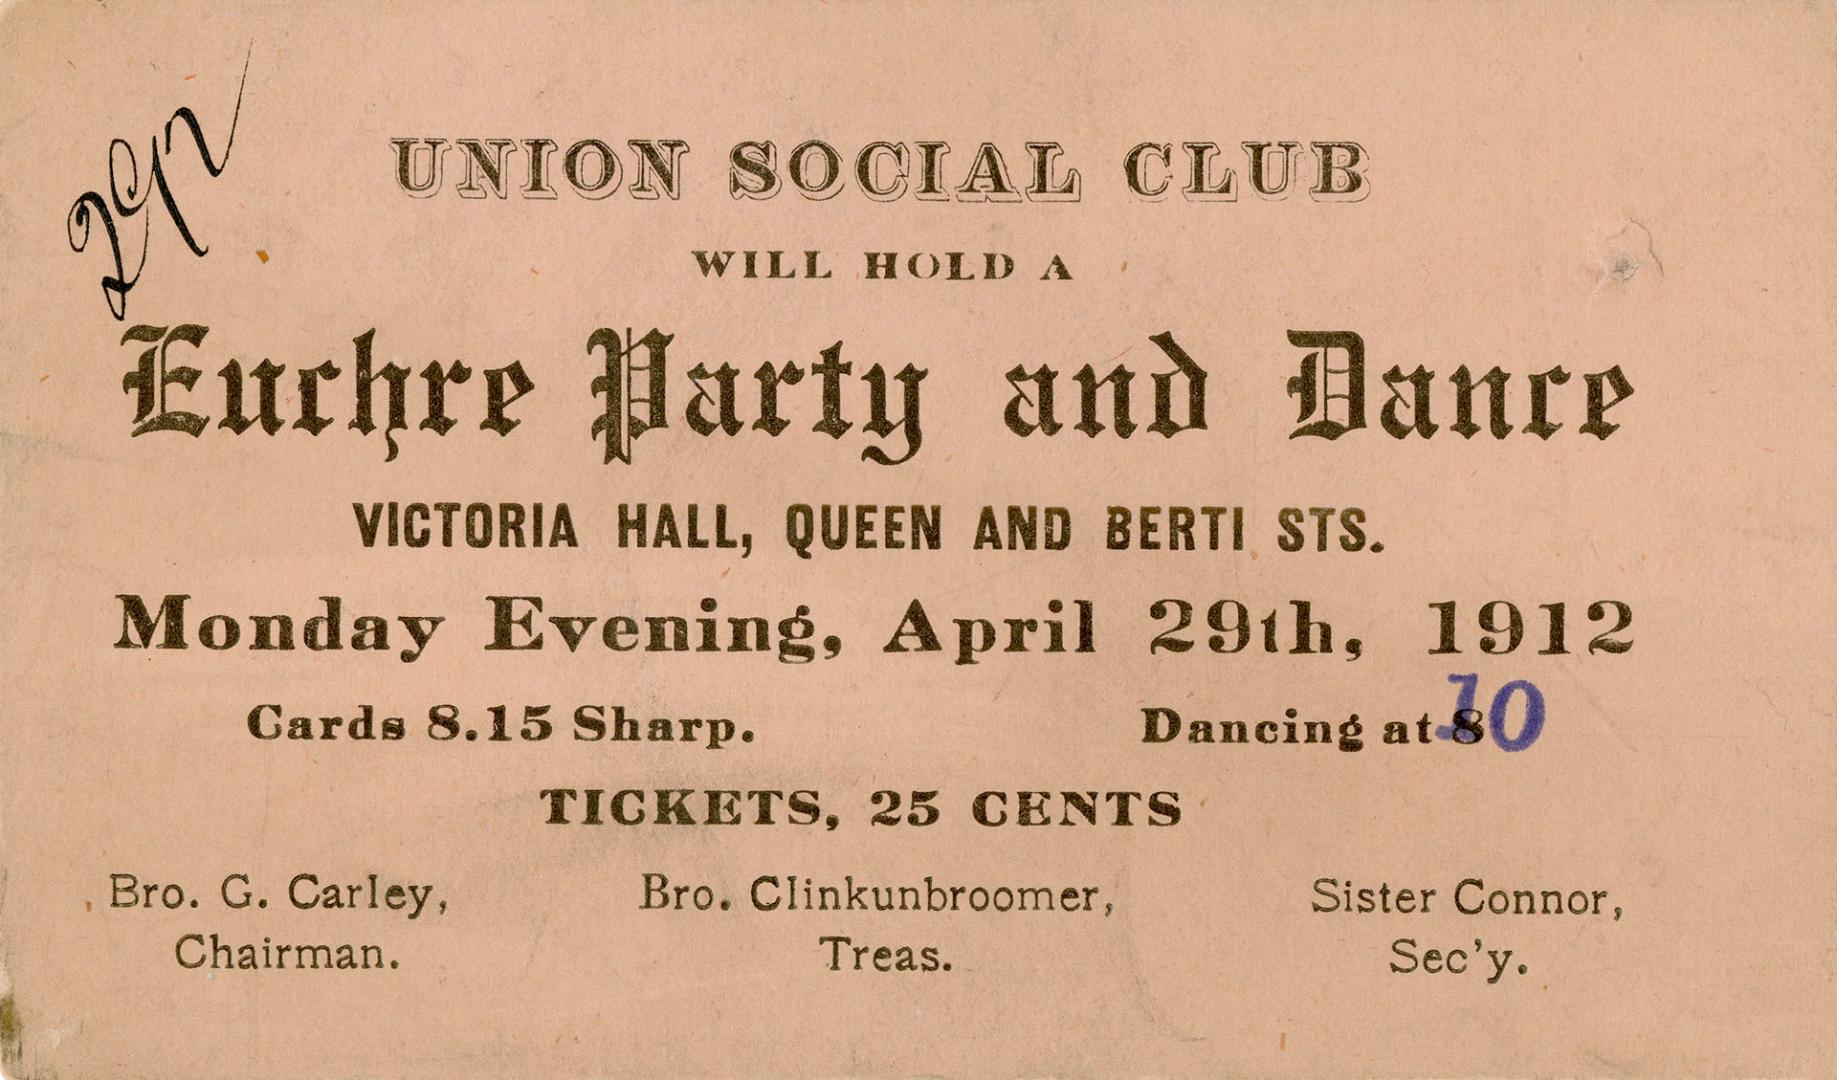 Union Social Club will hold a euchre party and dance, Victoria Hall, Queen and Berti Sts